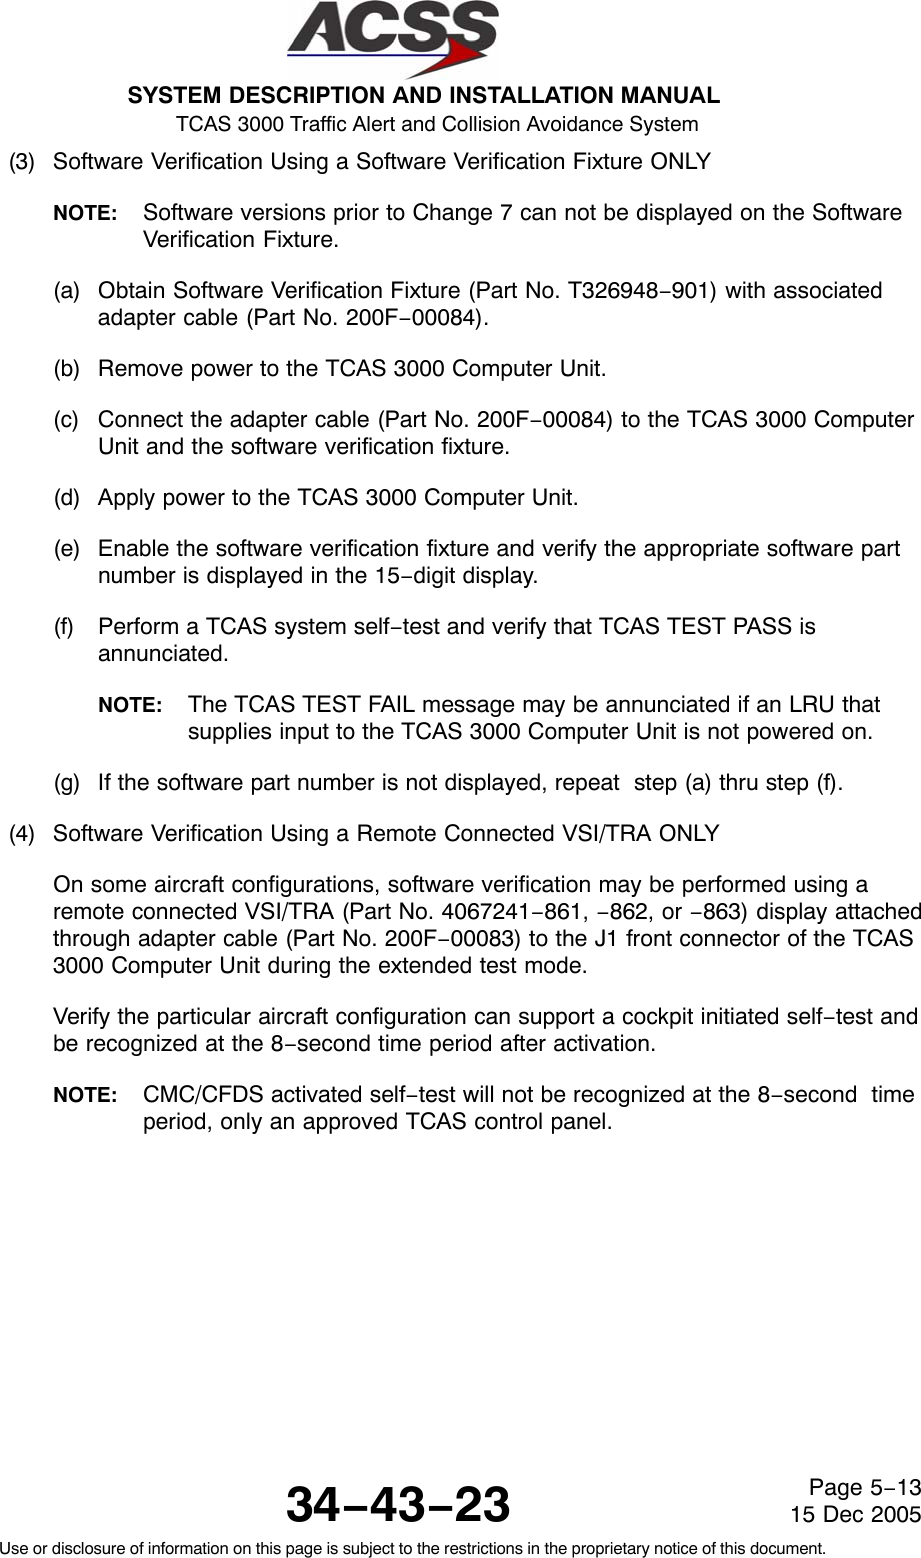 SYSTEM DESCRIPTION AND INSTALLATION MANUAL TCAS 3000 Traffic Alert and Collision Avoidance System34−43−23Use or disclosure of information on this page is subject to the restrictions in the proprietary notice of this document.Page 5−1315 Dec 2005(3) Software Verification Using a Software Verification Fixture ONLYNOTE: Software versions prior to Change 7 can not be displayed on the SoftwareVerification Fixture.(a) Obtain Software Verification Fixture (Part No. T326948−901) with associatedadapter cable (Part No. 200F−00084).(b) Remove power to the TCAS 3000 Computer Unit.(c) Connect the adapter cable (Part No. 200F−00084) to the TCAS 3000 ComputerUnit and the software verification fixture.(d) Apply power to the TCAS 3000 Computer Unit.(e) Enable the software verification fixture and verify the appropriate software partnumber is displayed in the 15−digit display.(f) Perform a TCAS system self−test and verify that TCAS TEST PASS isannunciated.NOTE: The TCAS TEST FAIL message may be annunciated if an LRU thatsupplies input to the TCAS 3000 Computer Unit is not powered on.(g) If the software part number is not displayed, repeat  step (a) thru step (f).(4) Software Verification Using a Remote Connected VSI/TRA ONLYOn some aircraft configurations, software verification may be performed using aremote connected VSI/TRA (Part No. 4067241−861, −862, or −863) display attachedthrough adapter cable (Part No. 200F−00083) to the J1 front connector of the TCAS3000 Computer Unit during the extended test mode.Verify the particular aircraft configuration can support a cockpit initiated self−test andbe recognized at the 8−second time period after activation.NOTE: CMC/CFDS activated self−test will not be recognized at the 8−second  timeperiod, only an approved TCAS control panel.